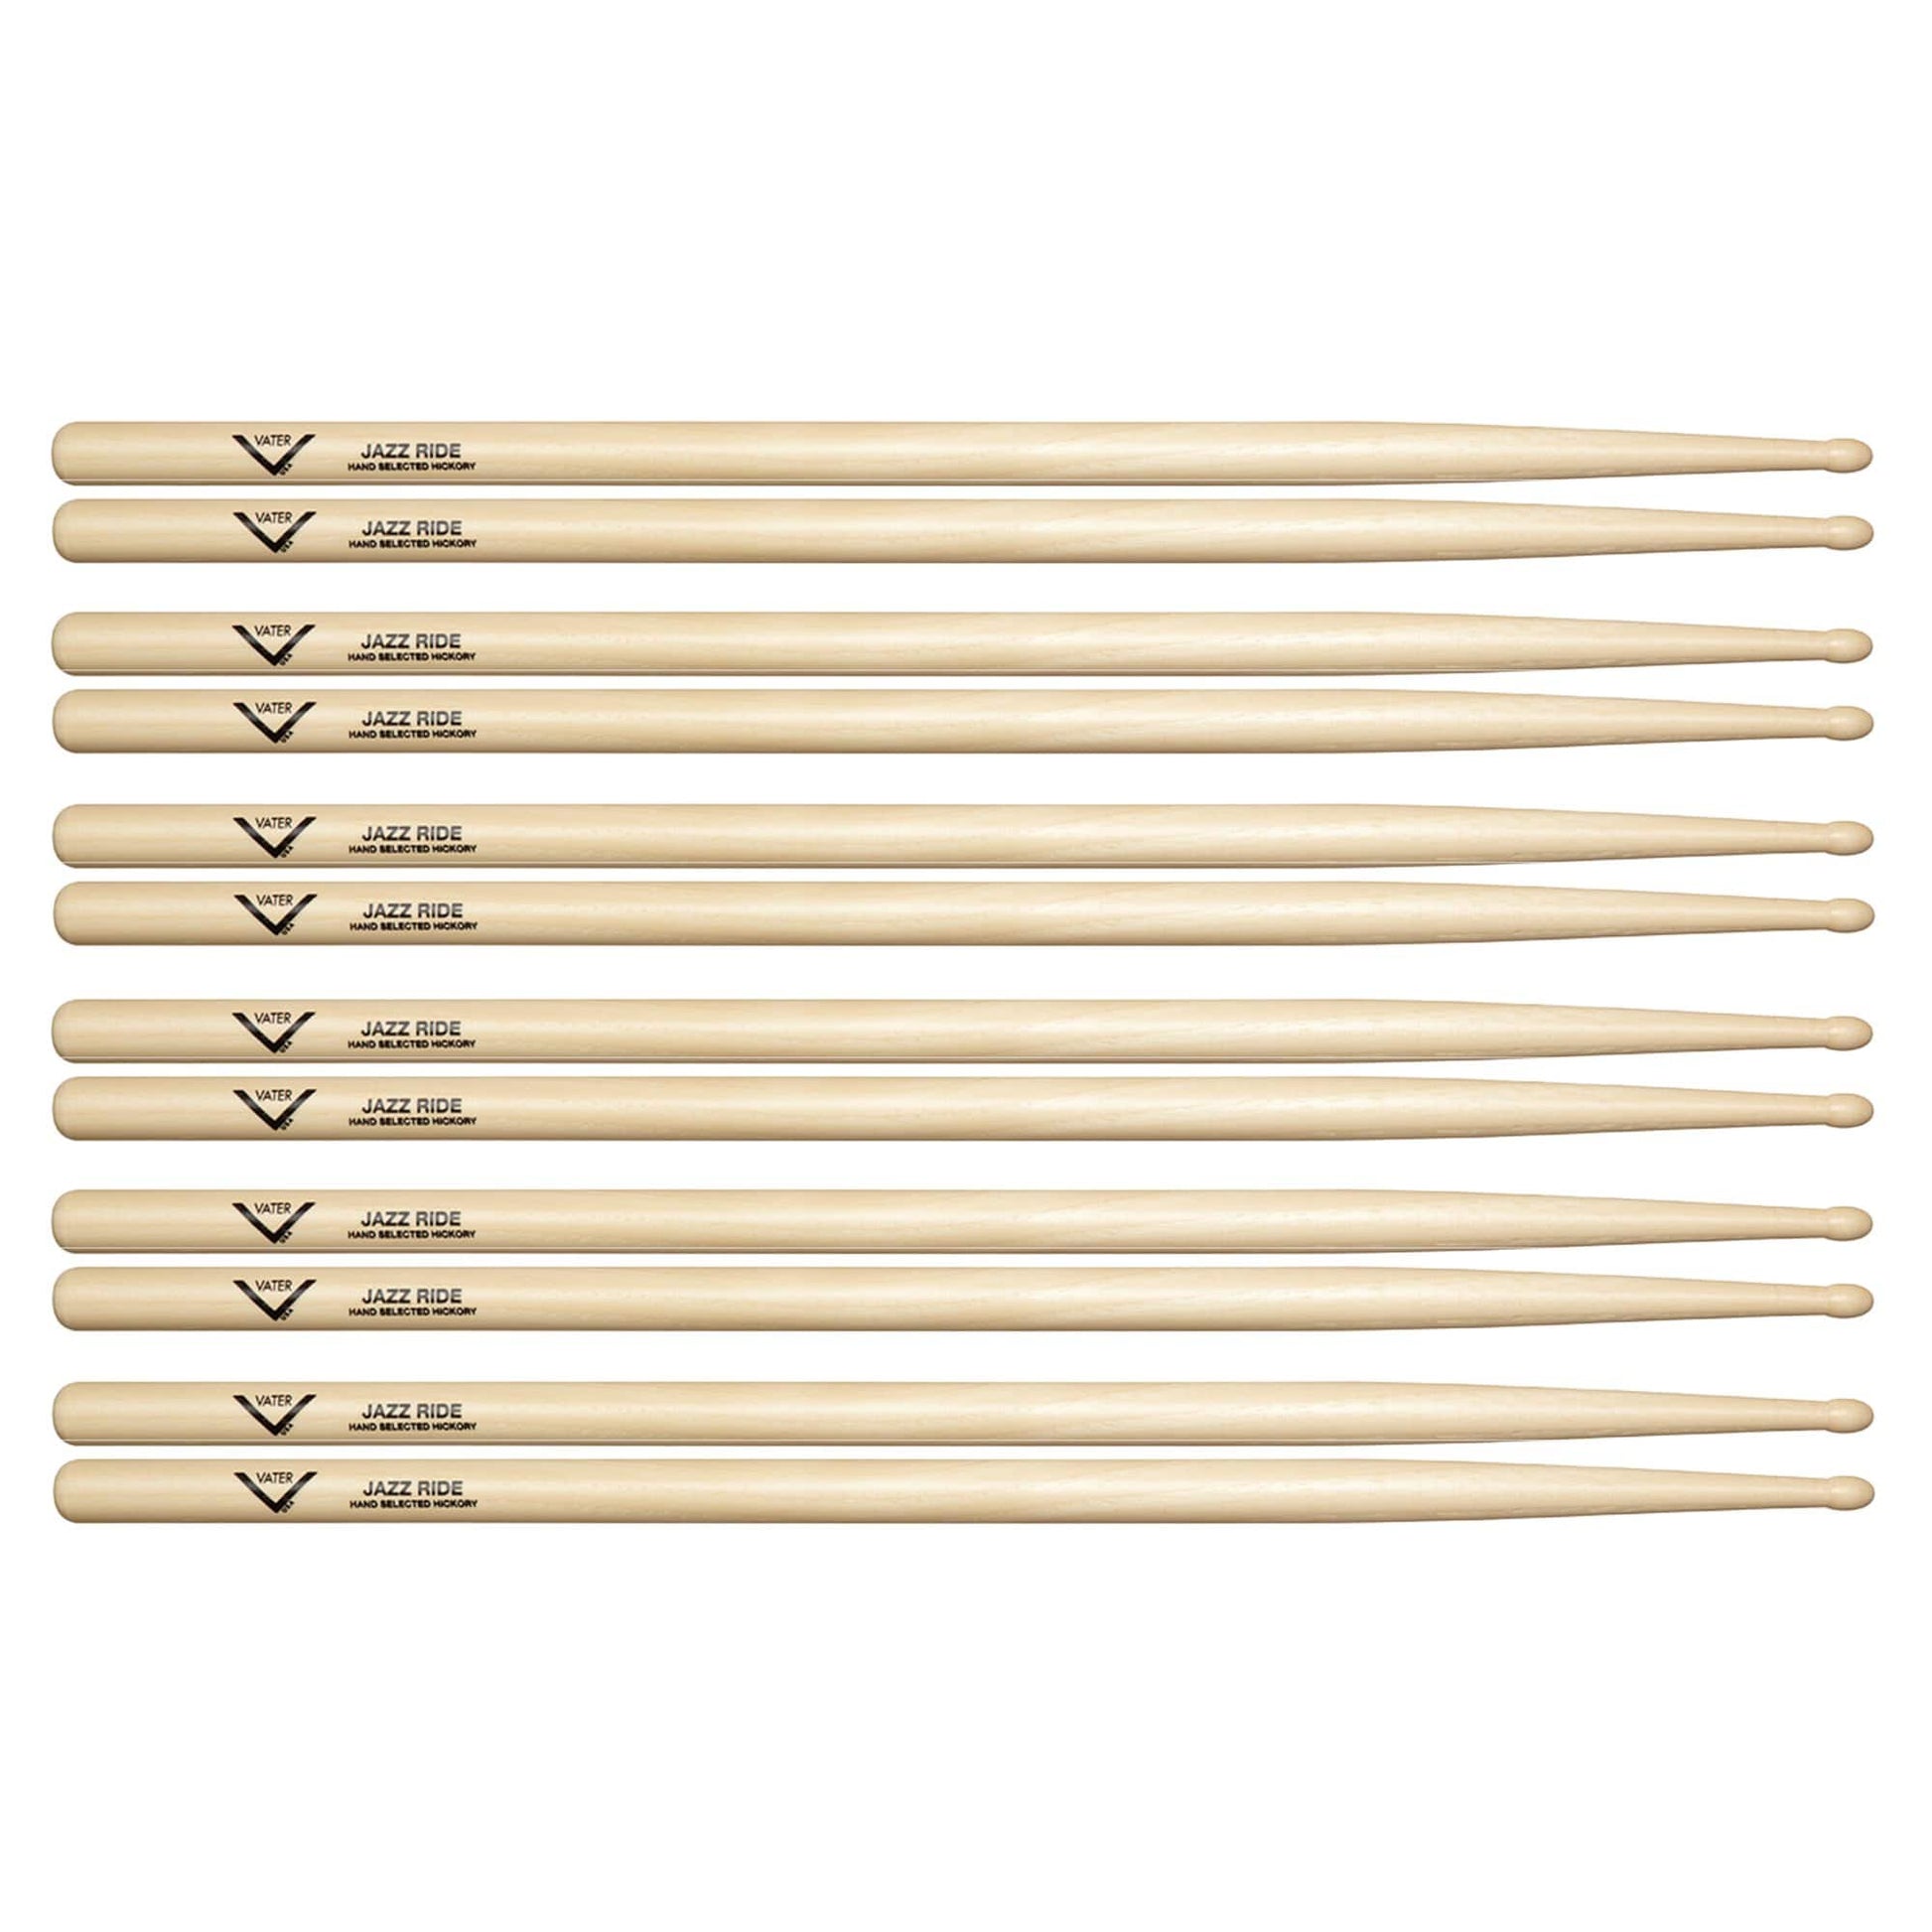 Vater Hickory Jazz Ride Wood Tip Drum Sticks (6 Pair Bundle) Drums and Percussion / Parts and Accessories / Drum Sticks and Mallets